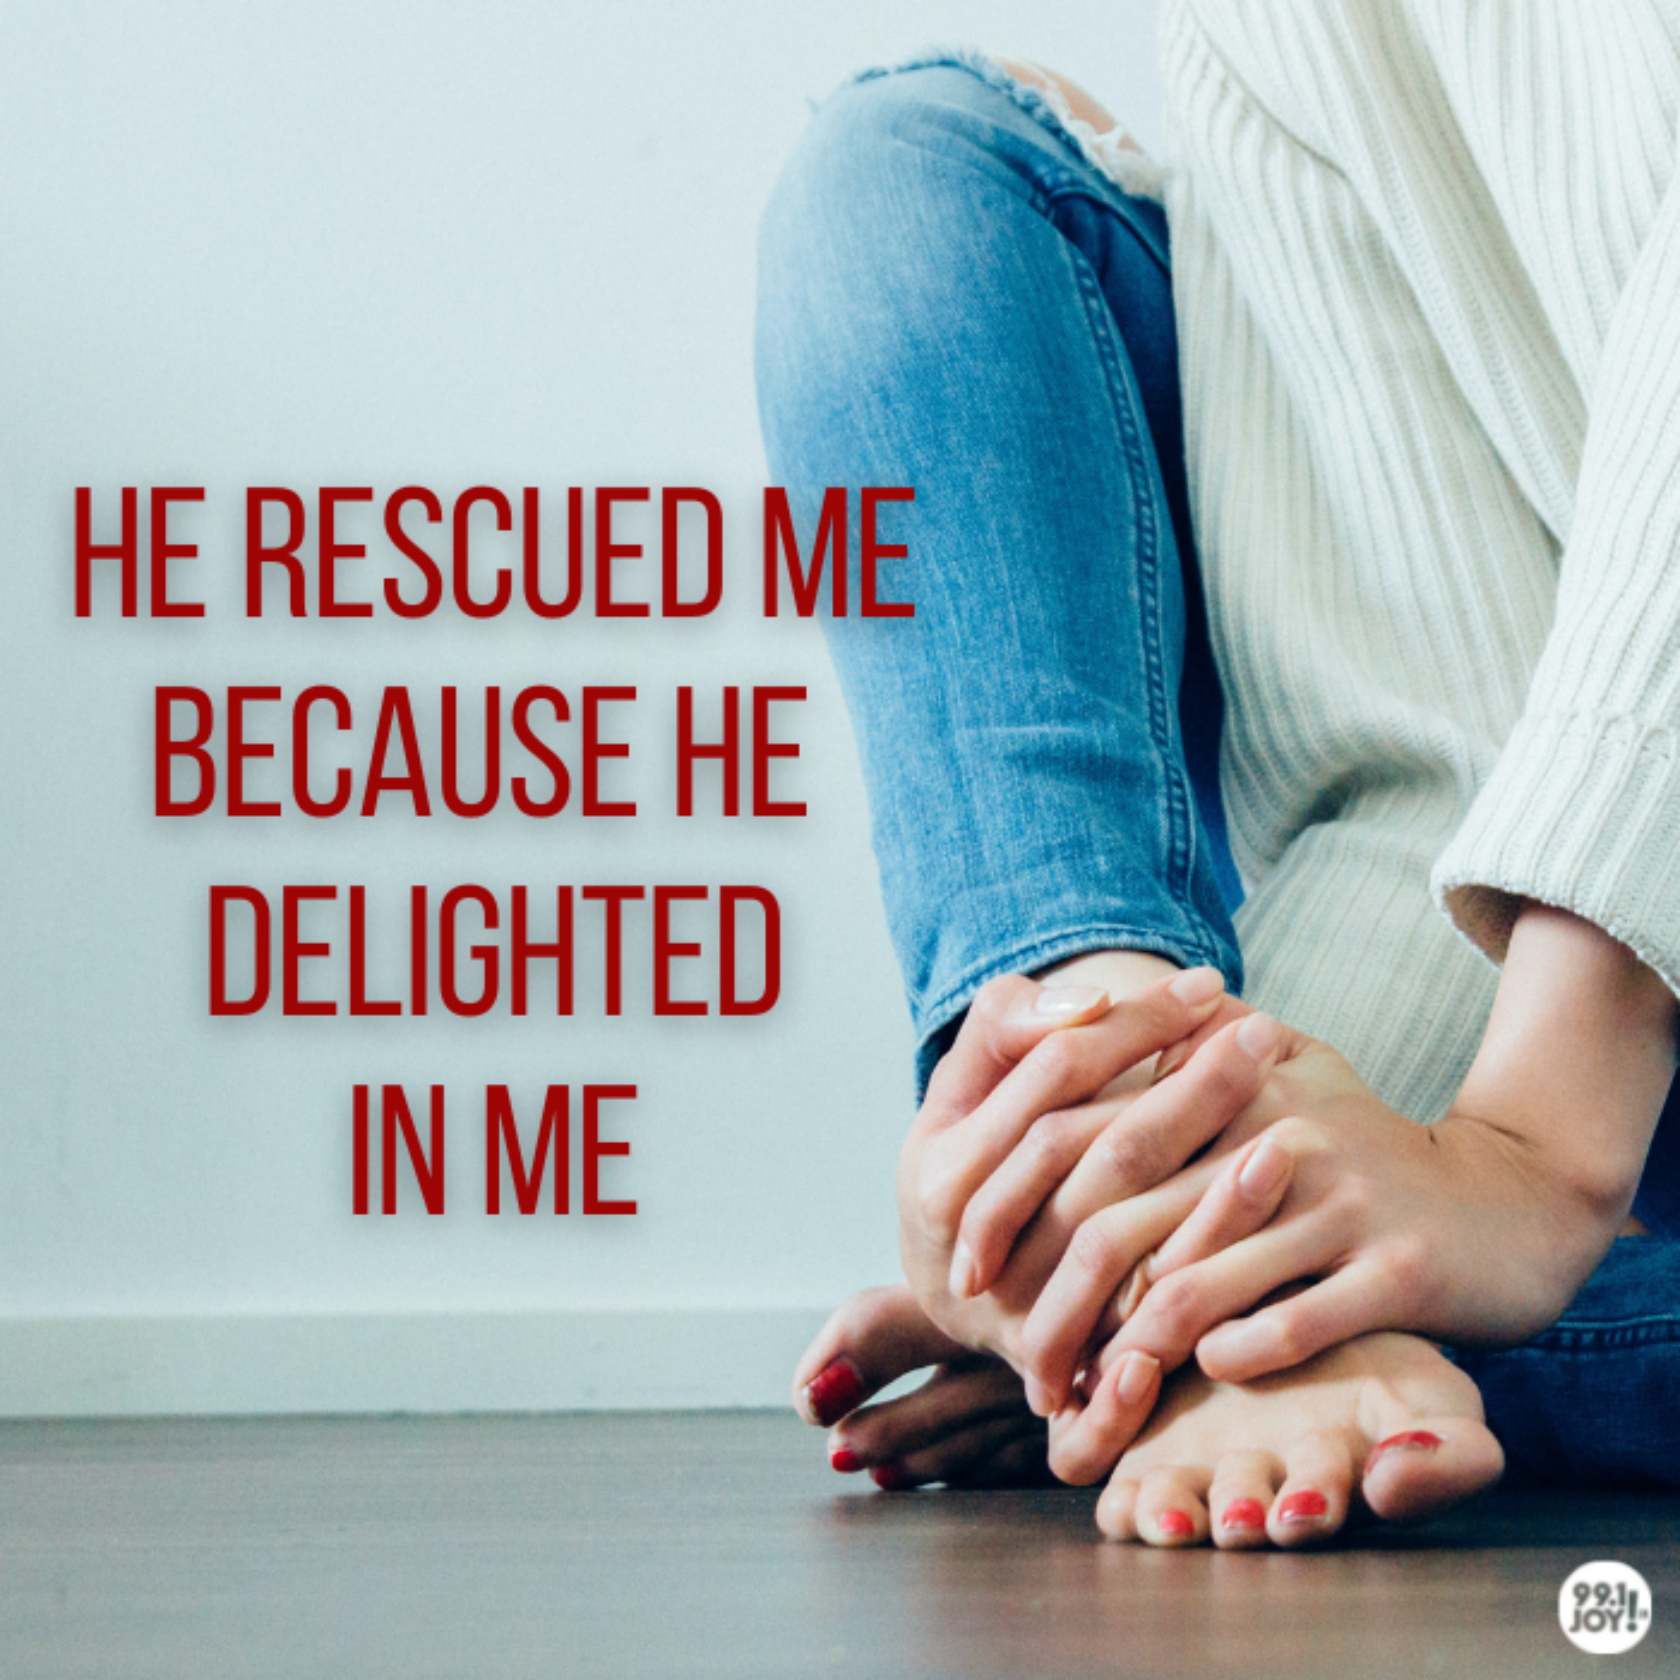 He Rescued Me Because He Delighted In Me